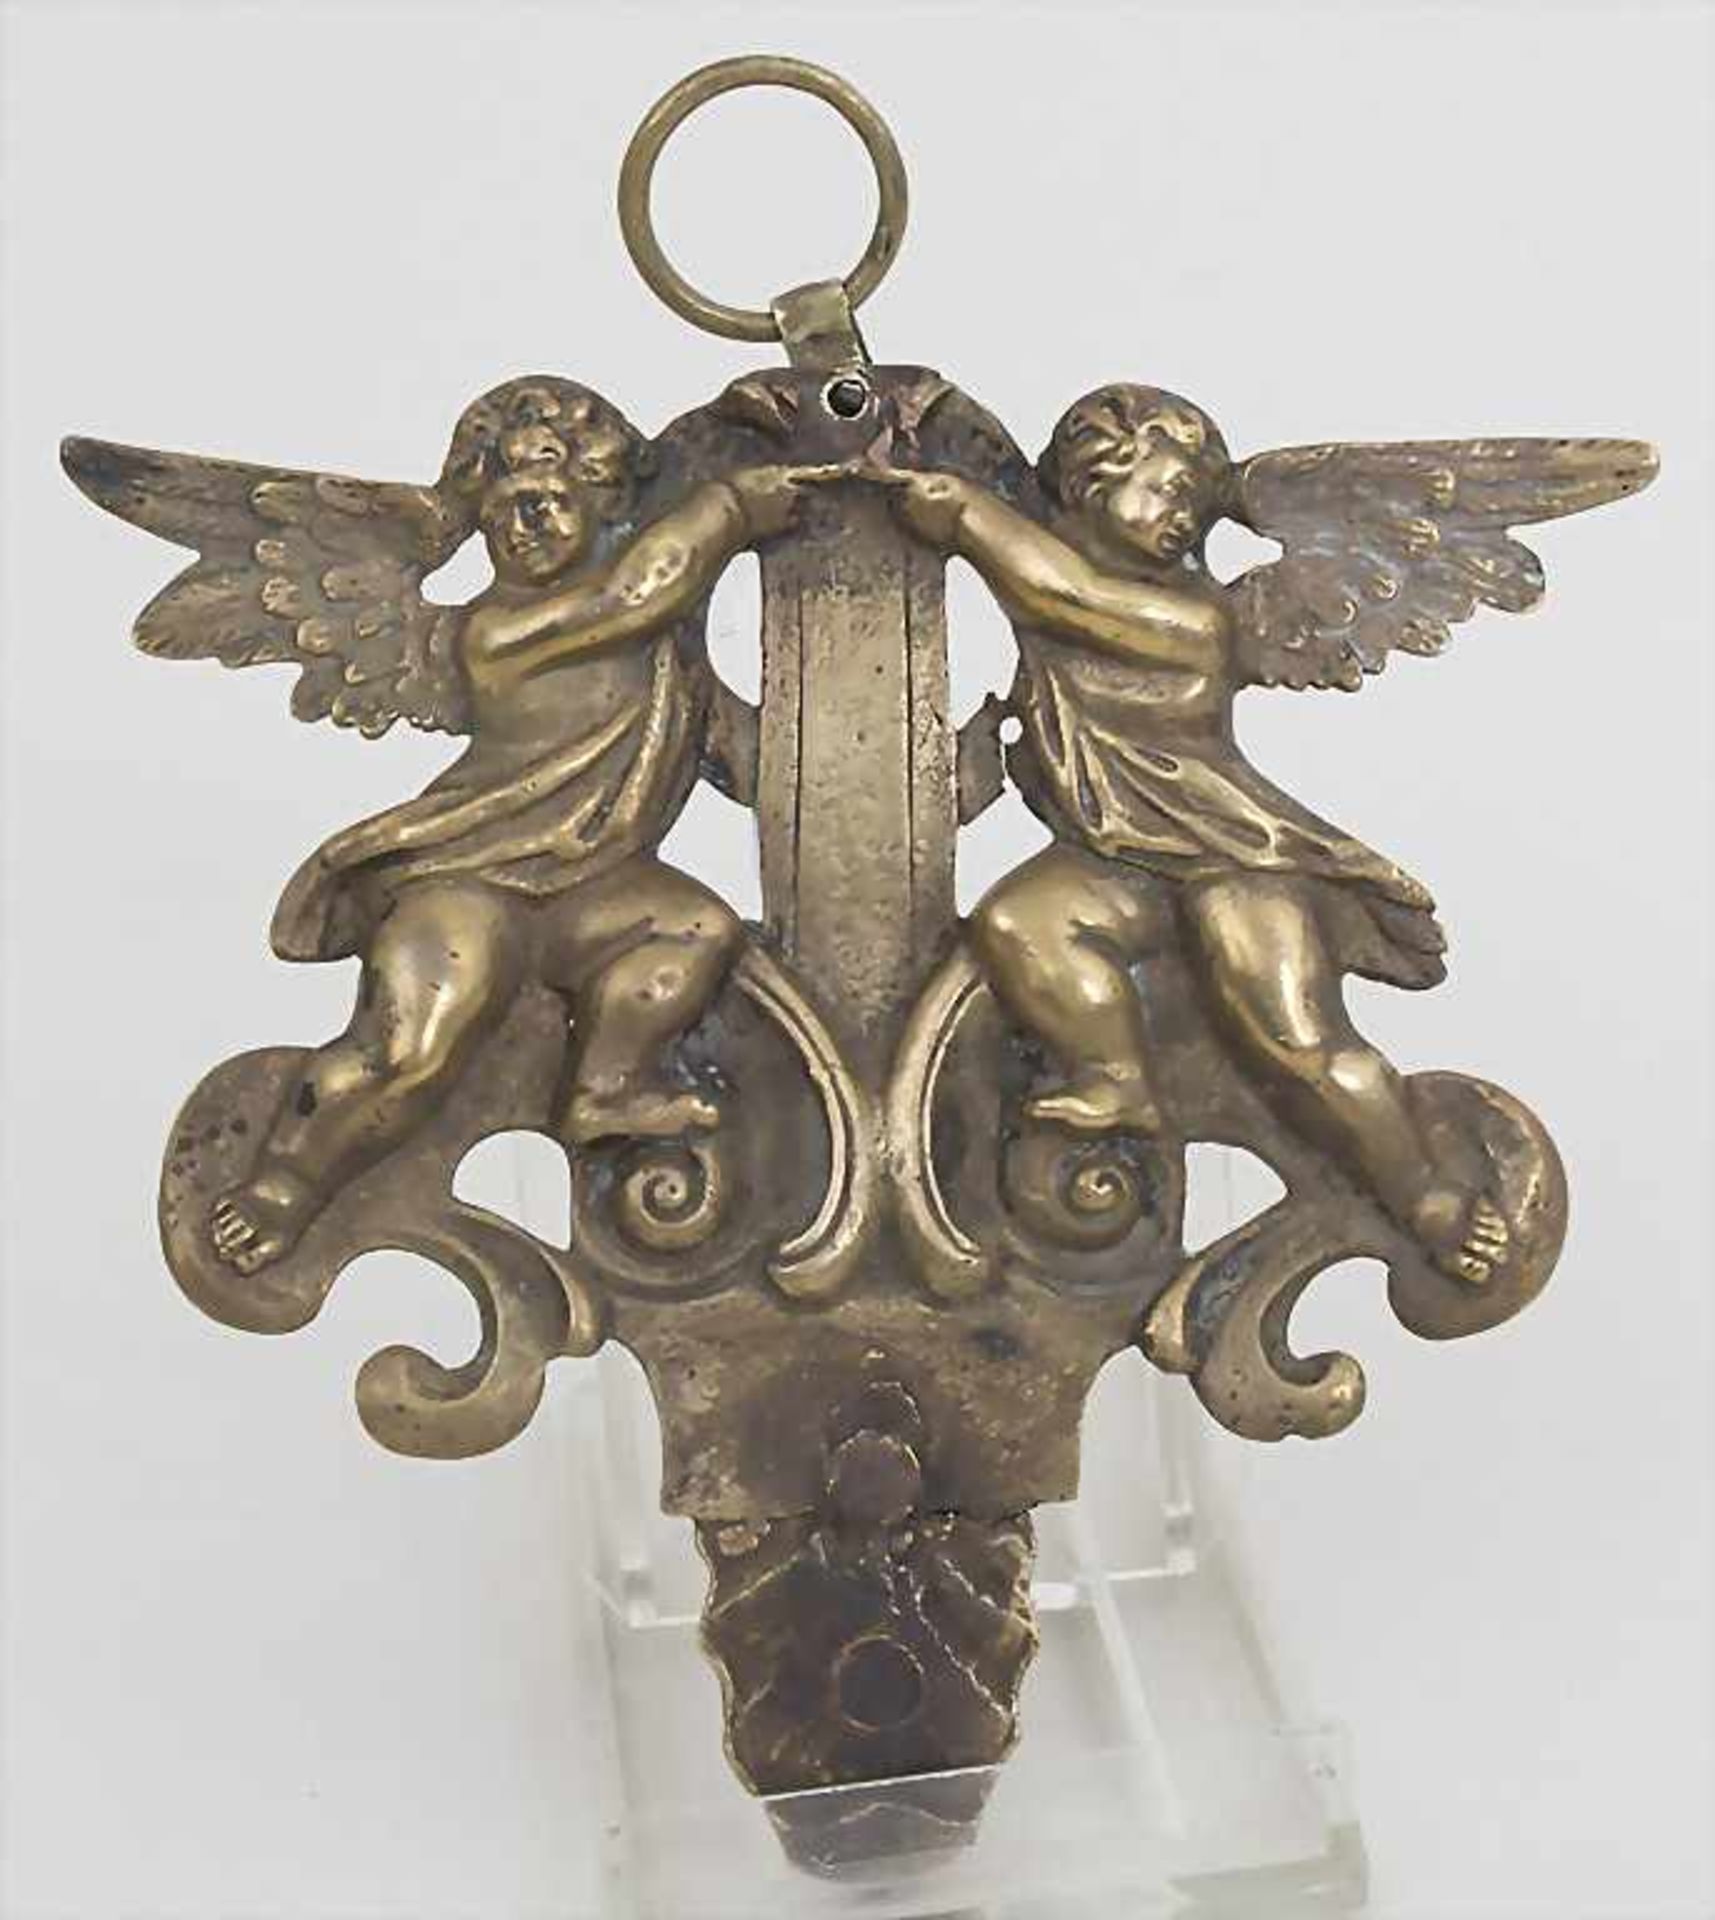 Wand-Applique mit Barock-Engeln / A wall plaque with a pair of baroque angel, 18. Jh.Material: